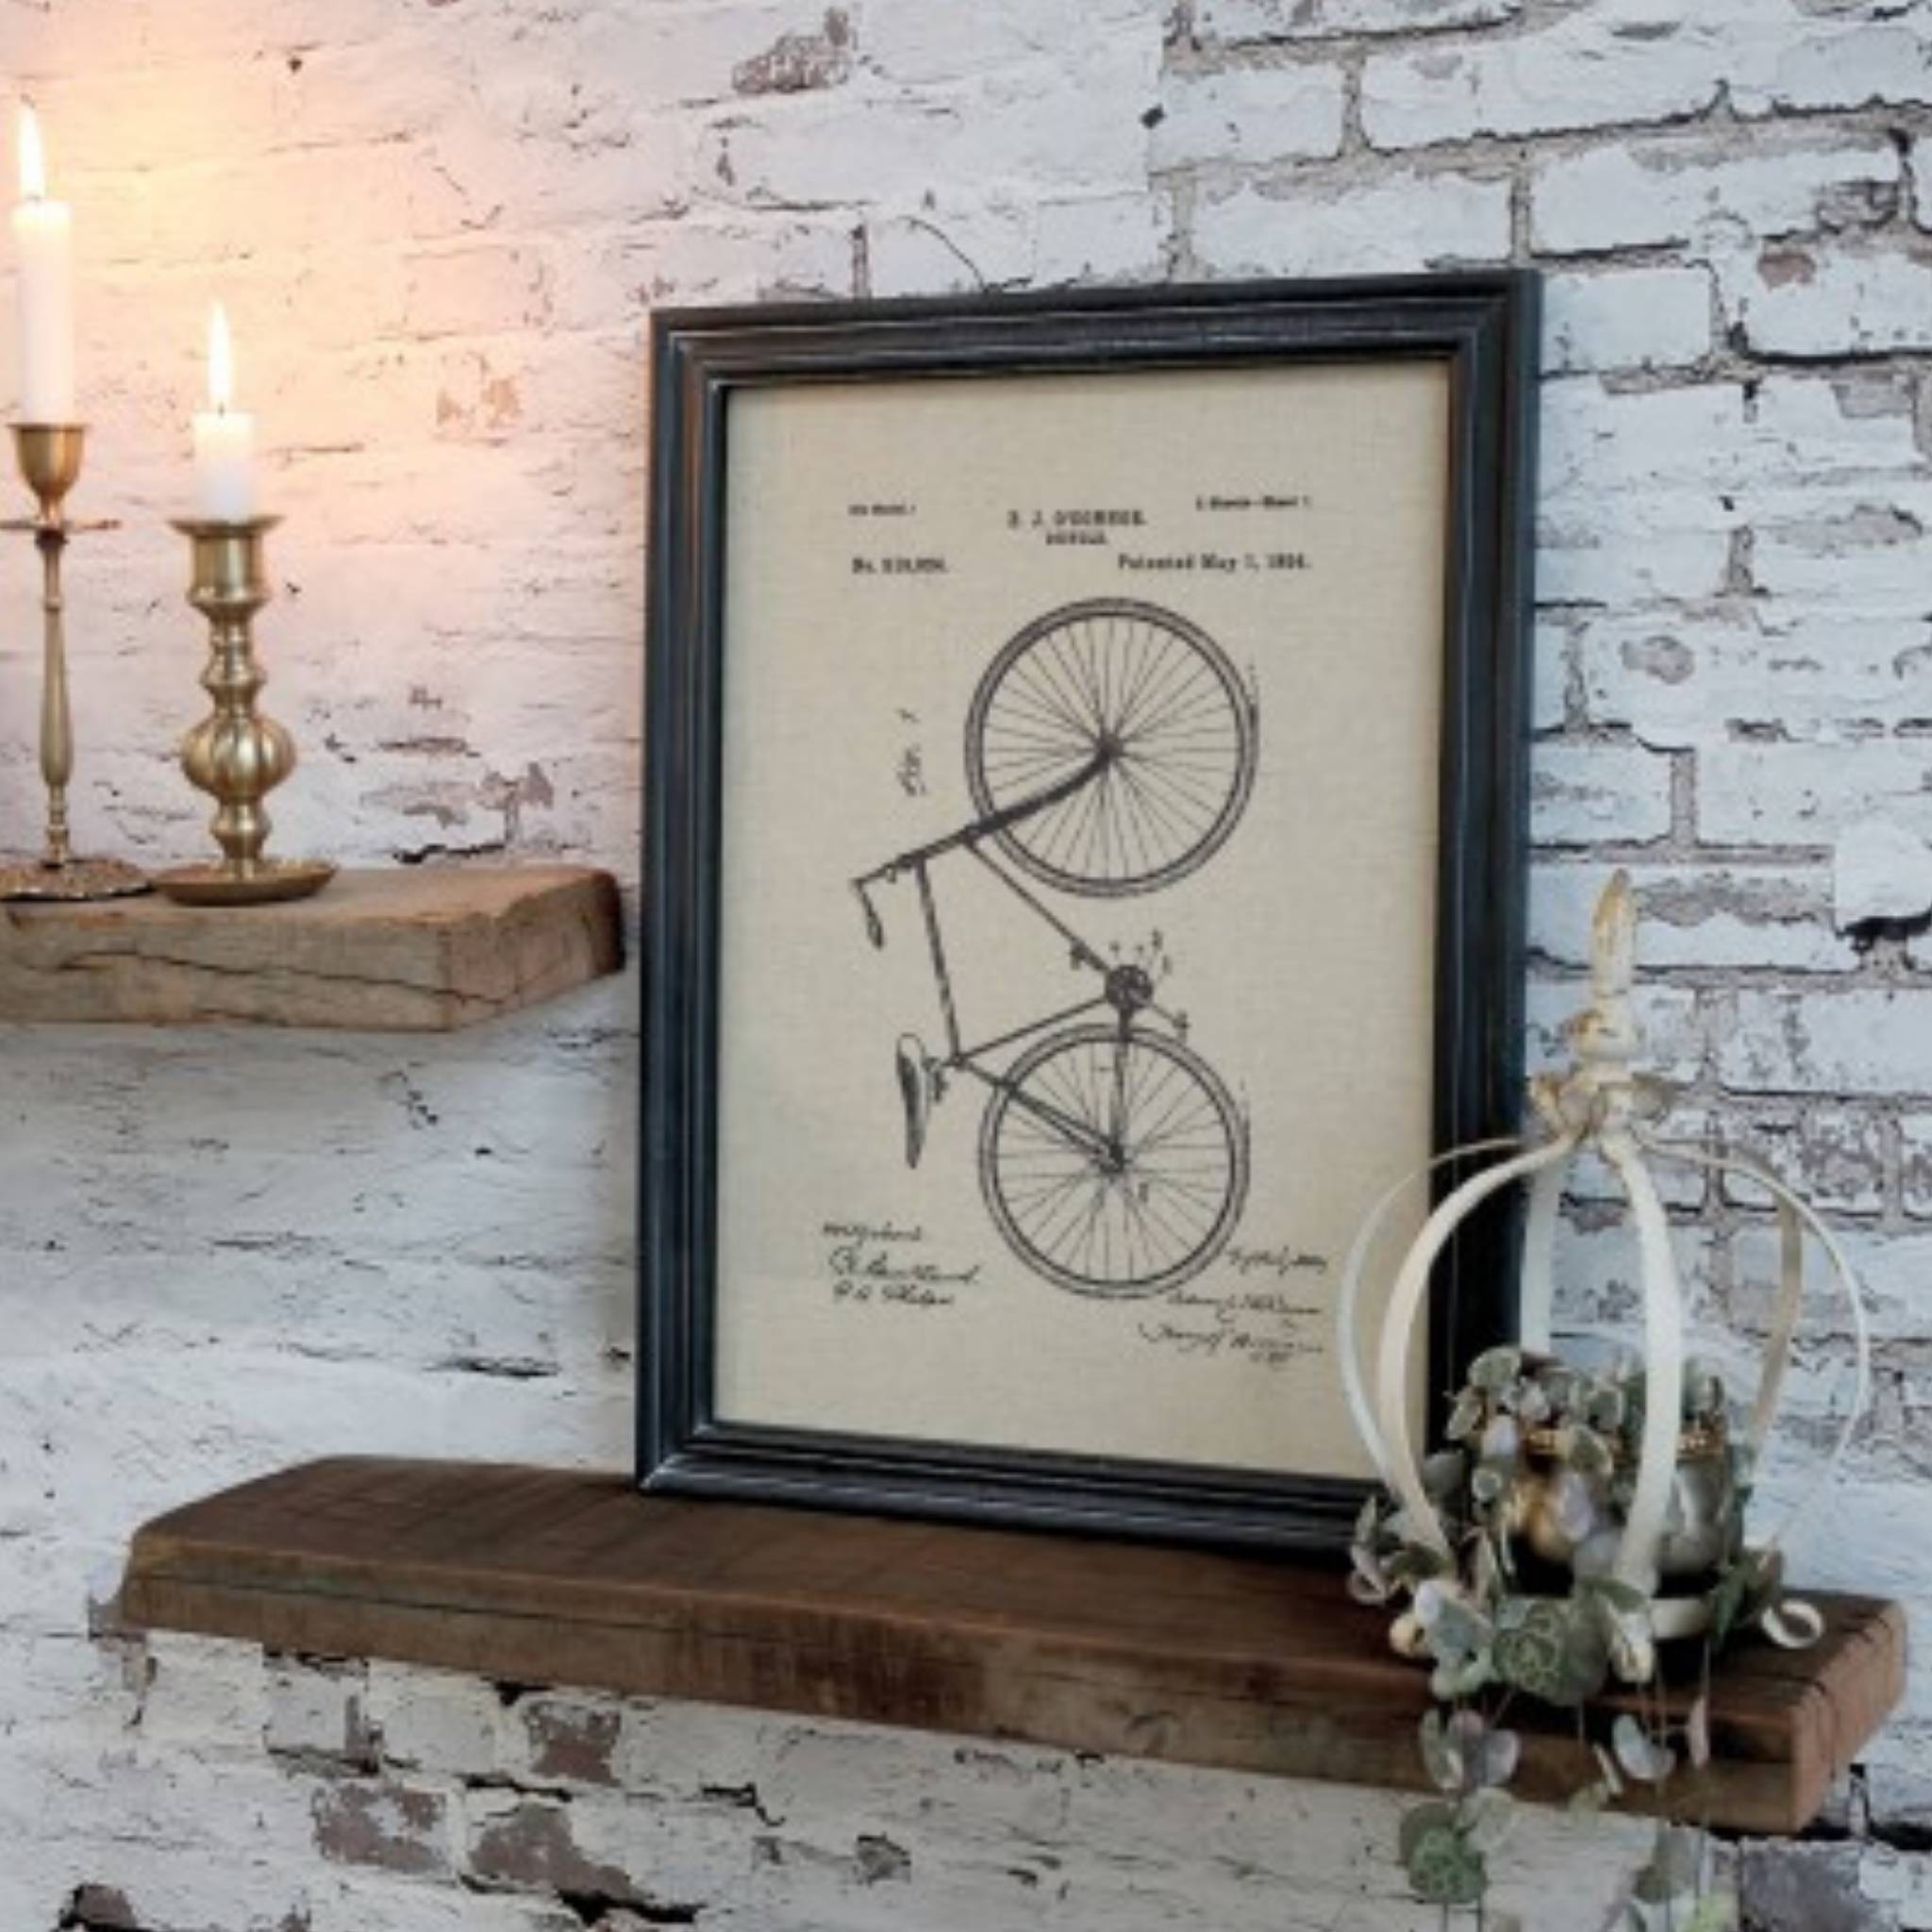 Bicycle Picture & Black Frame